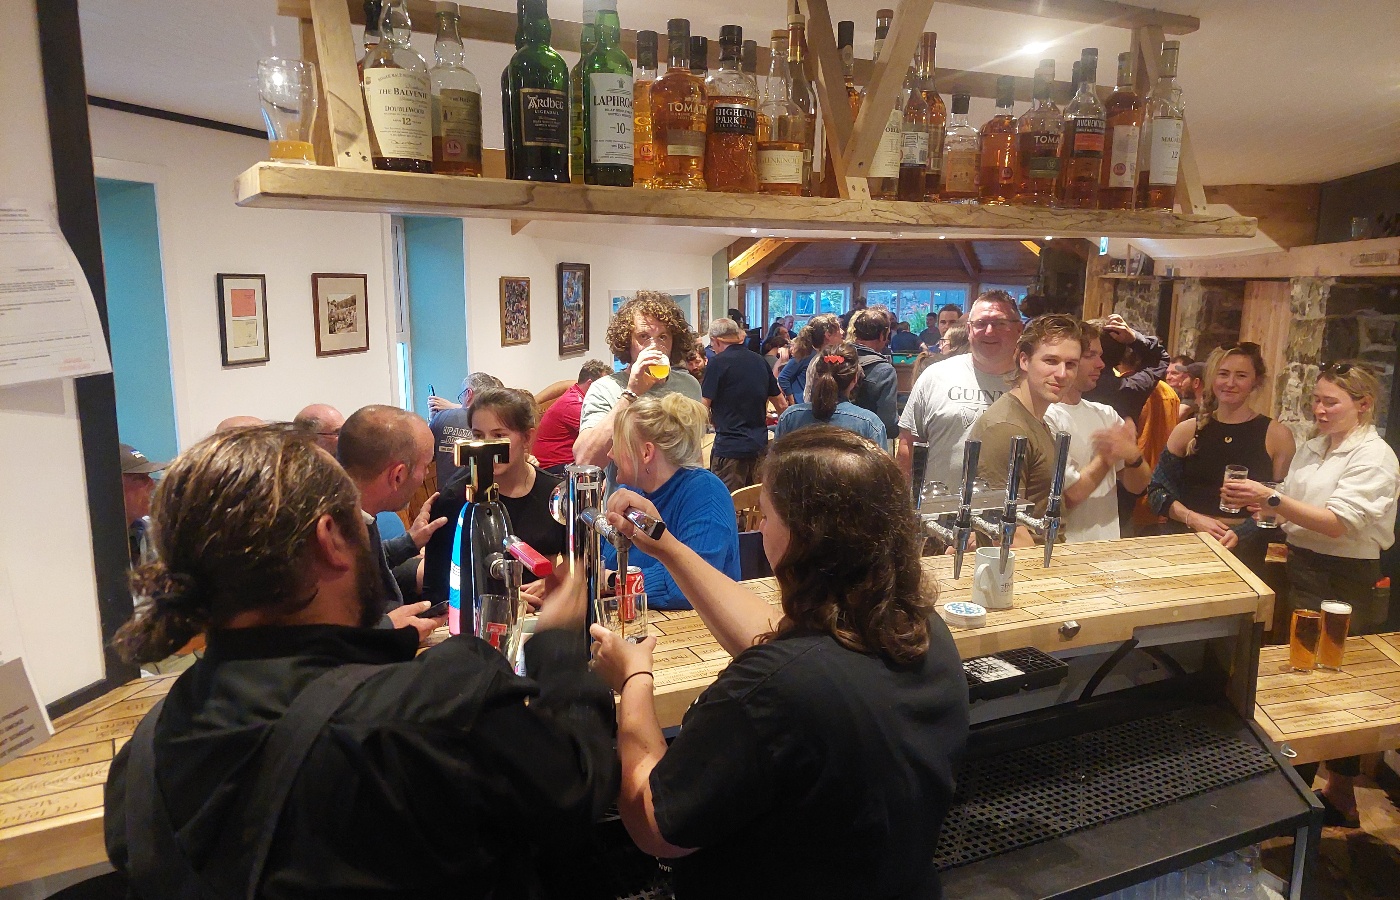 The pub reopened on Friday August 4 to eager customers.